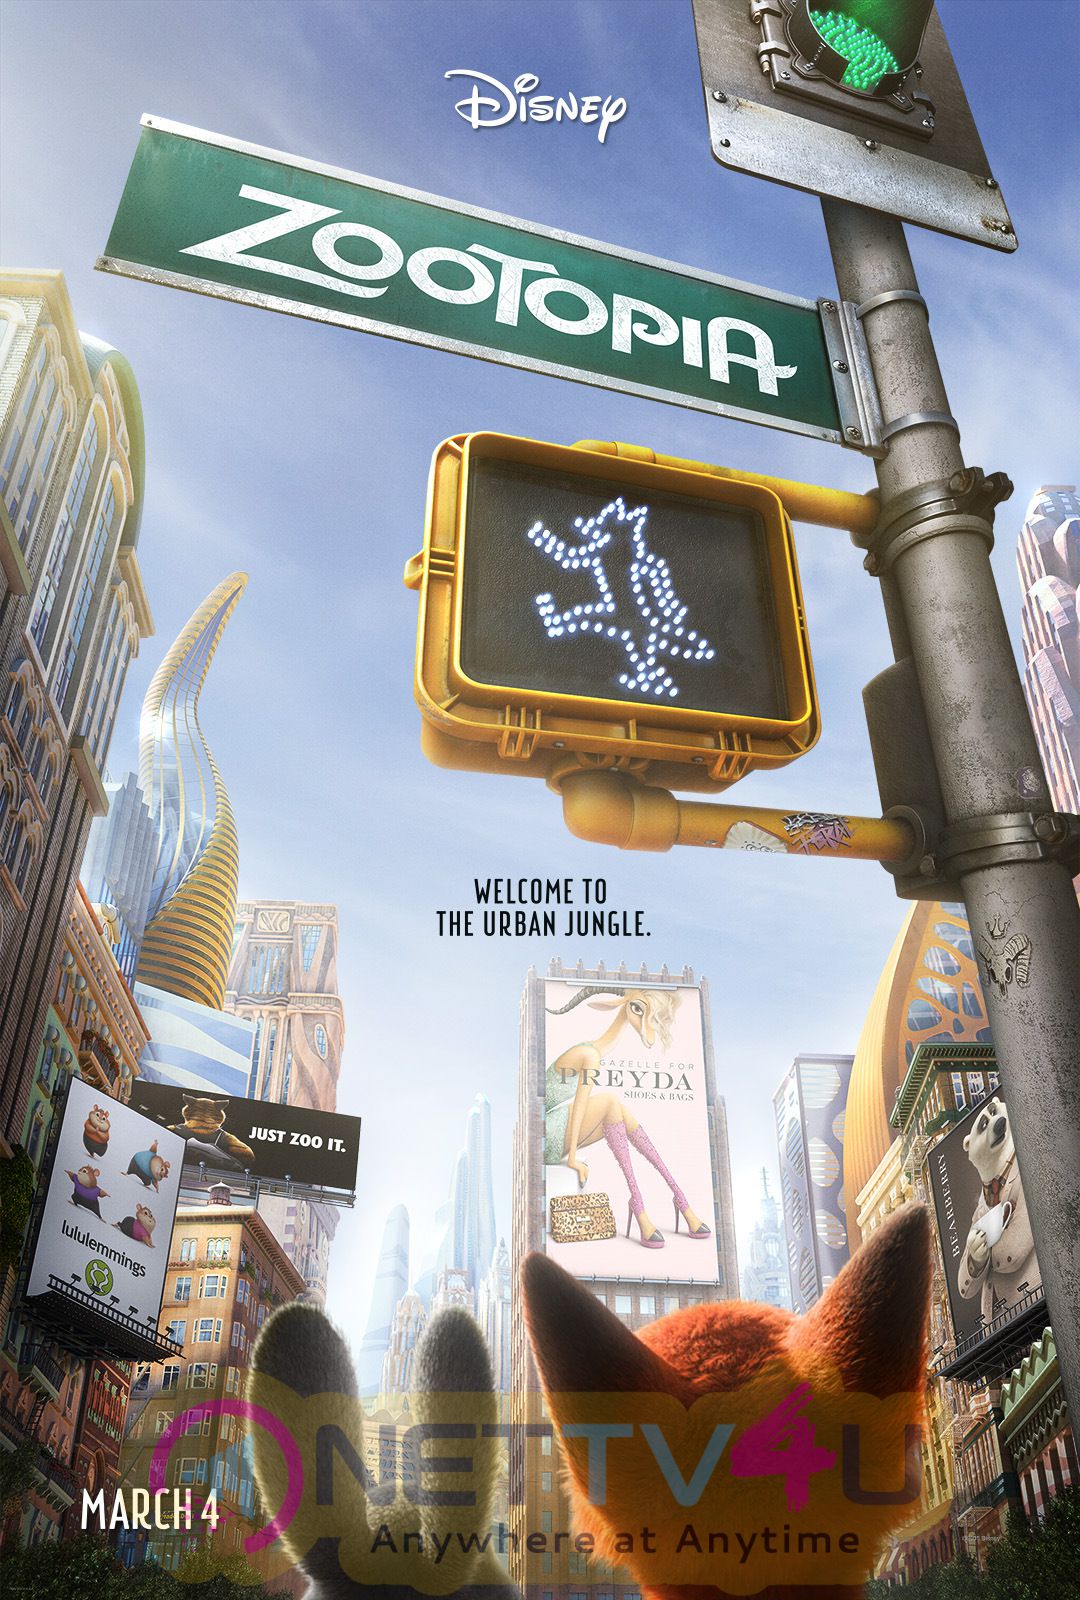 Zootopia Poster Characters Based On 'Lion King' And More Creature Hair Than Frozen! Record Breaking Special Effects In Store For